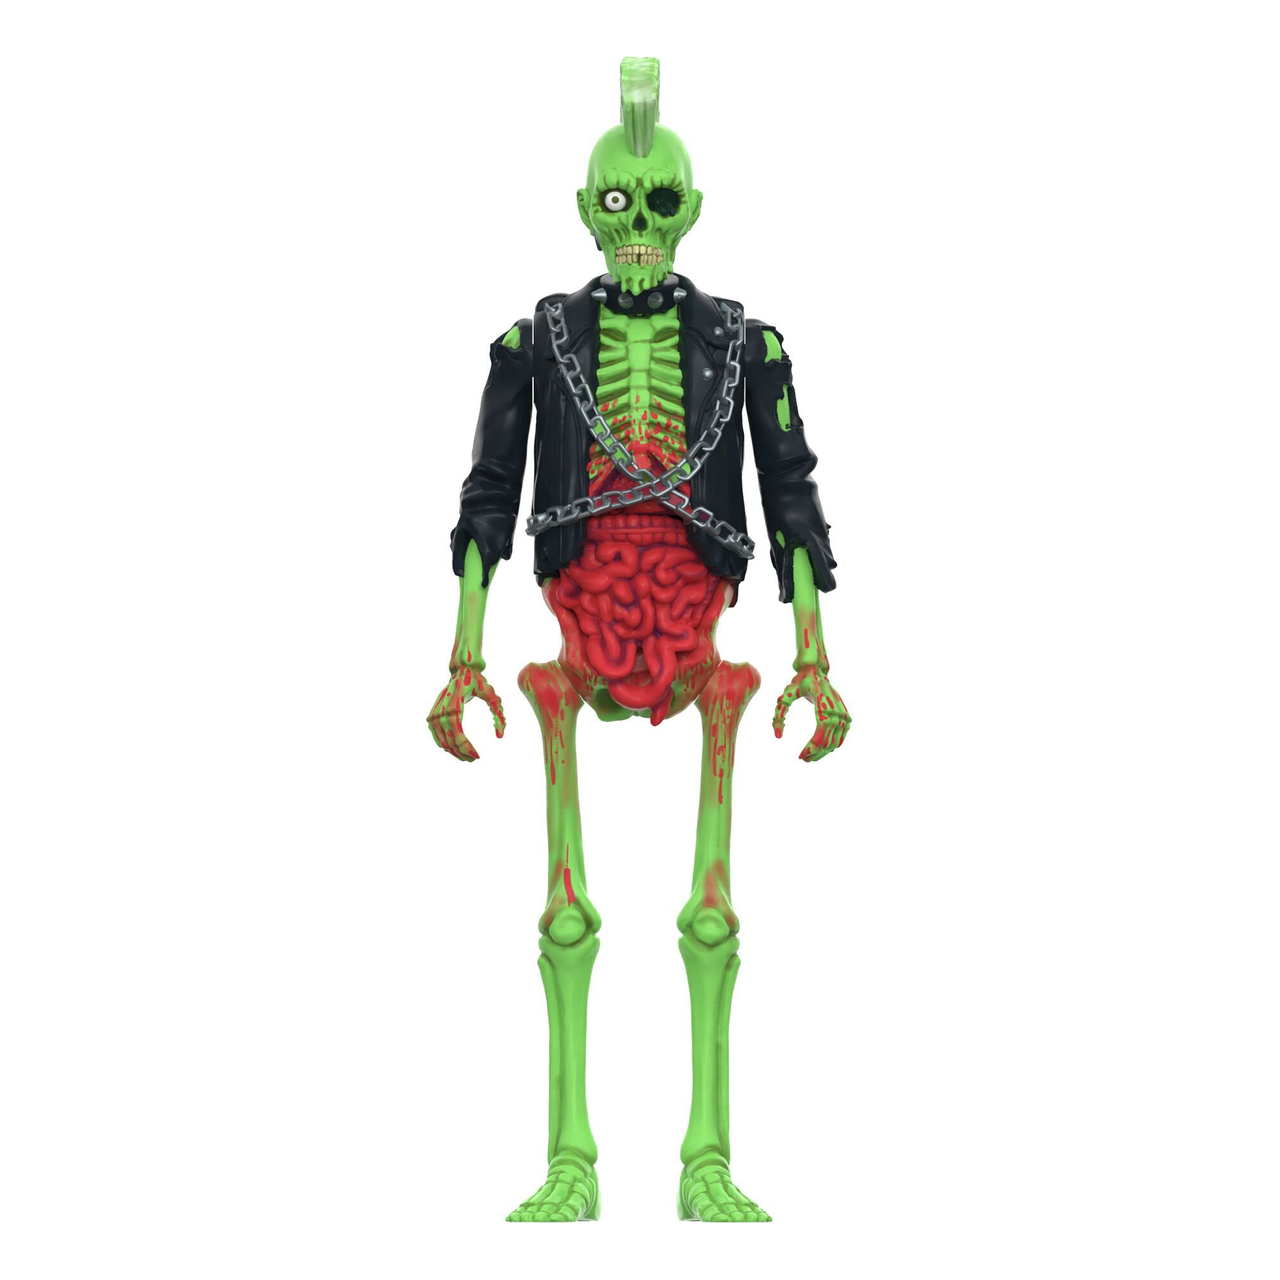 Return of the Living Dead Zombie Suicide Figure by Super7